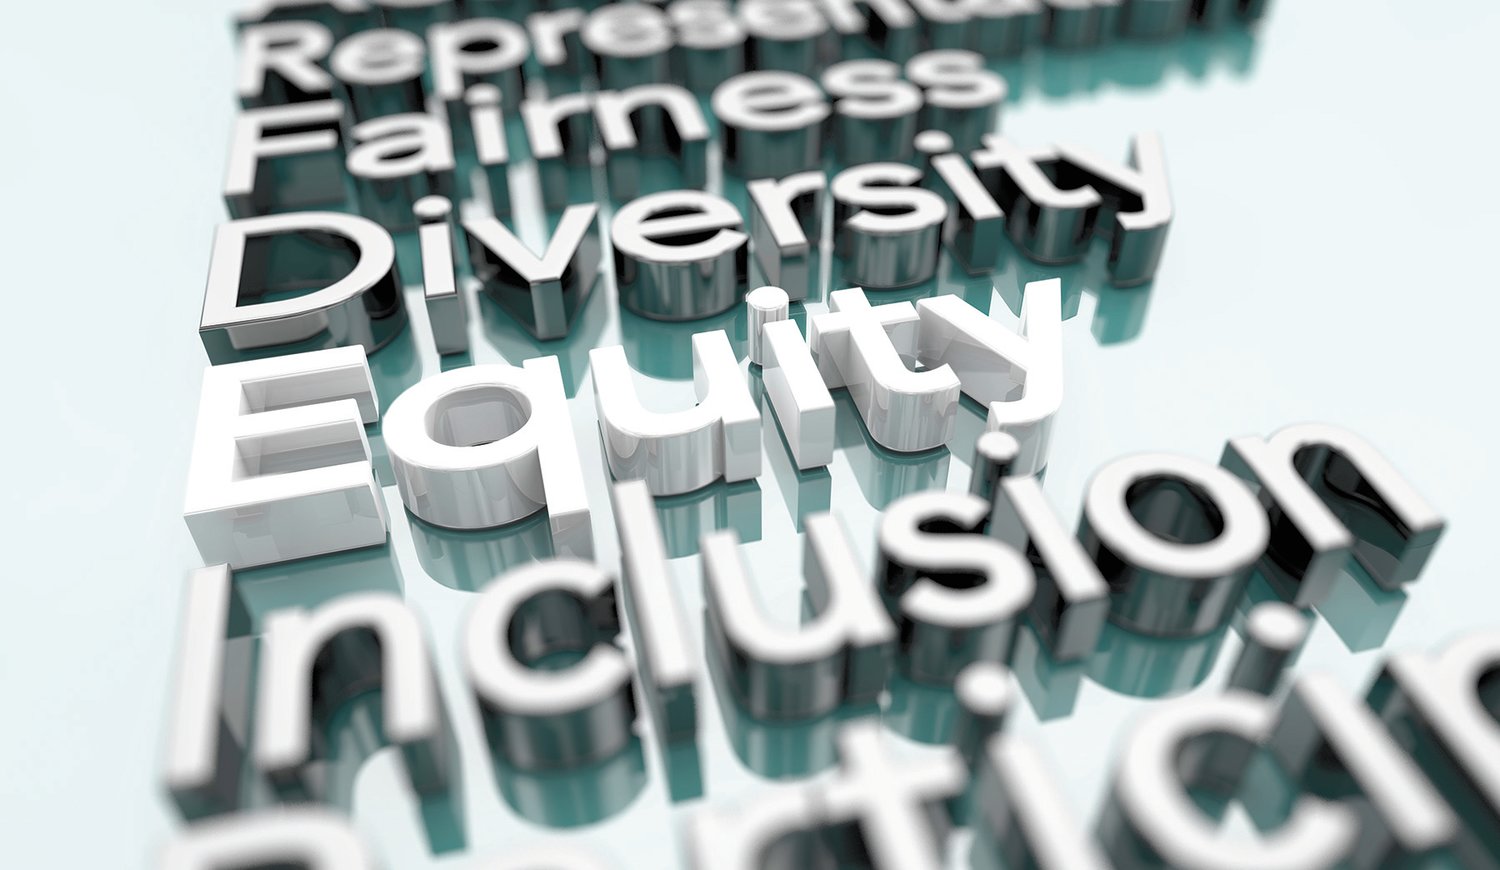 Equity Diversity Inclusion Fairness Equality Words 3d Illustration